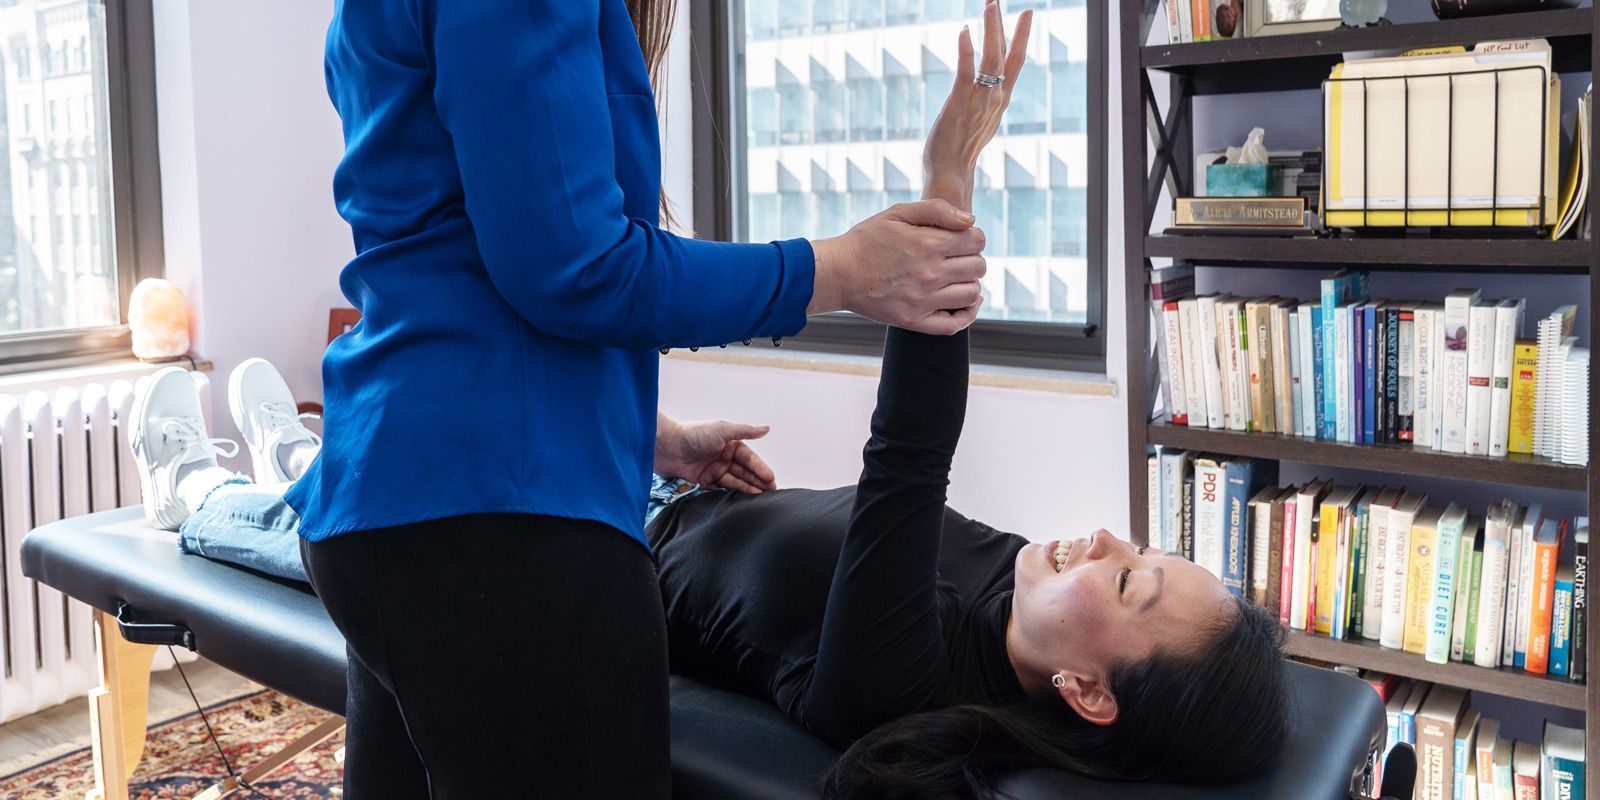 Applied Kinesiology NYC - Dr. Alicia Armitstead - Applied Kinesiologist at the Healing Arts NYC Health and Wellness Center in Manhattan NY 10017 and Connecticut